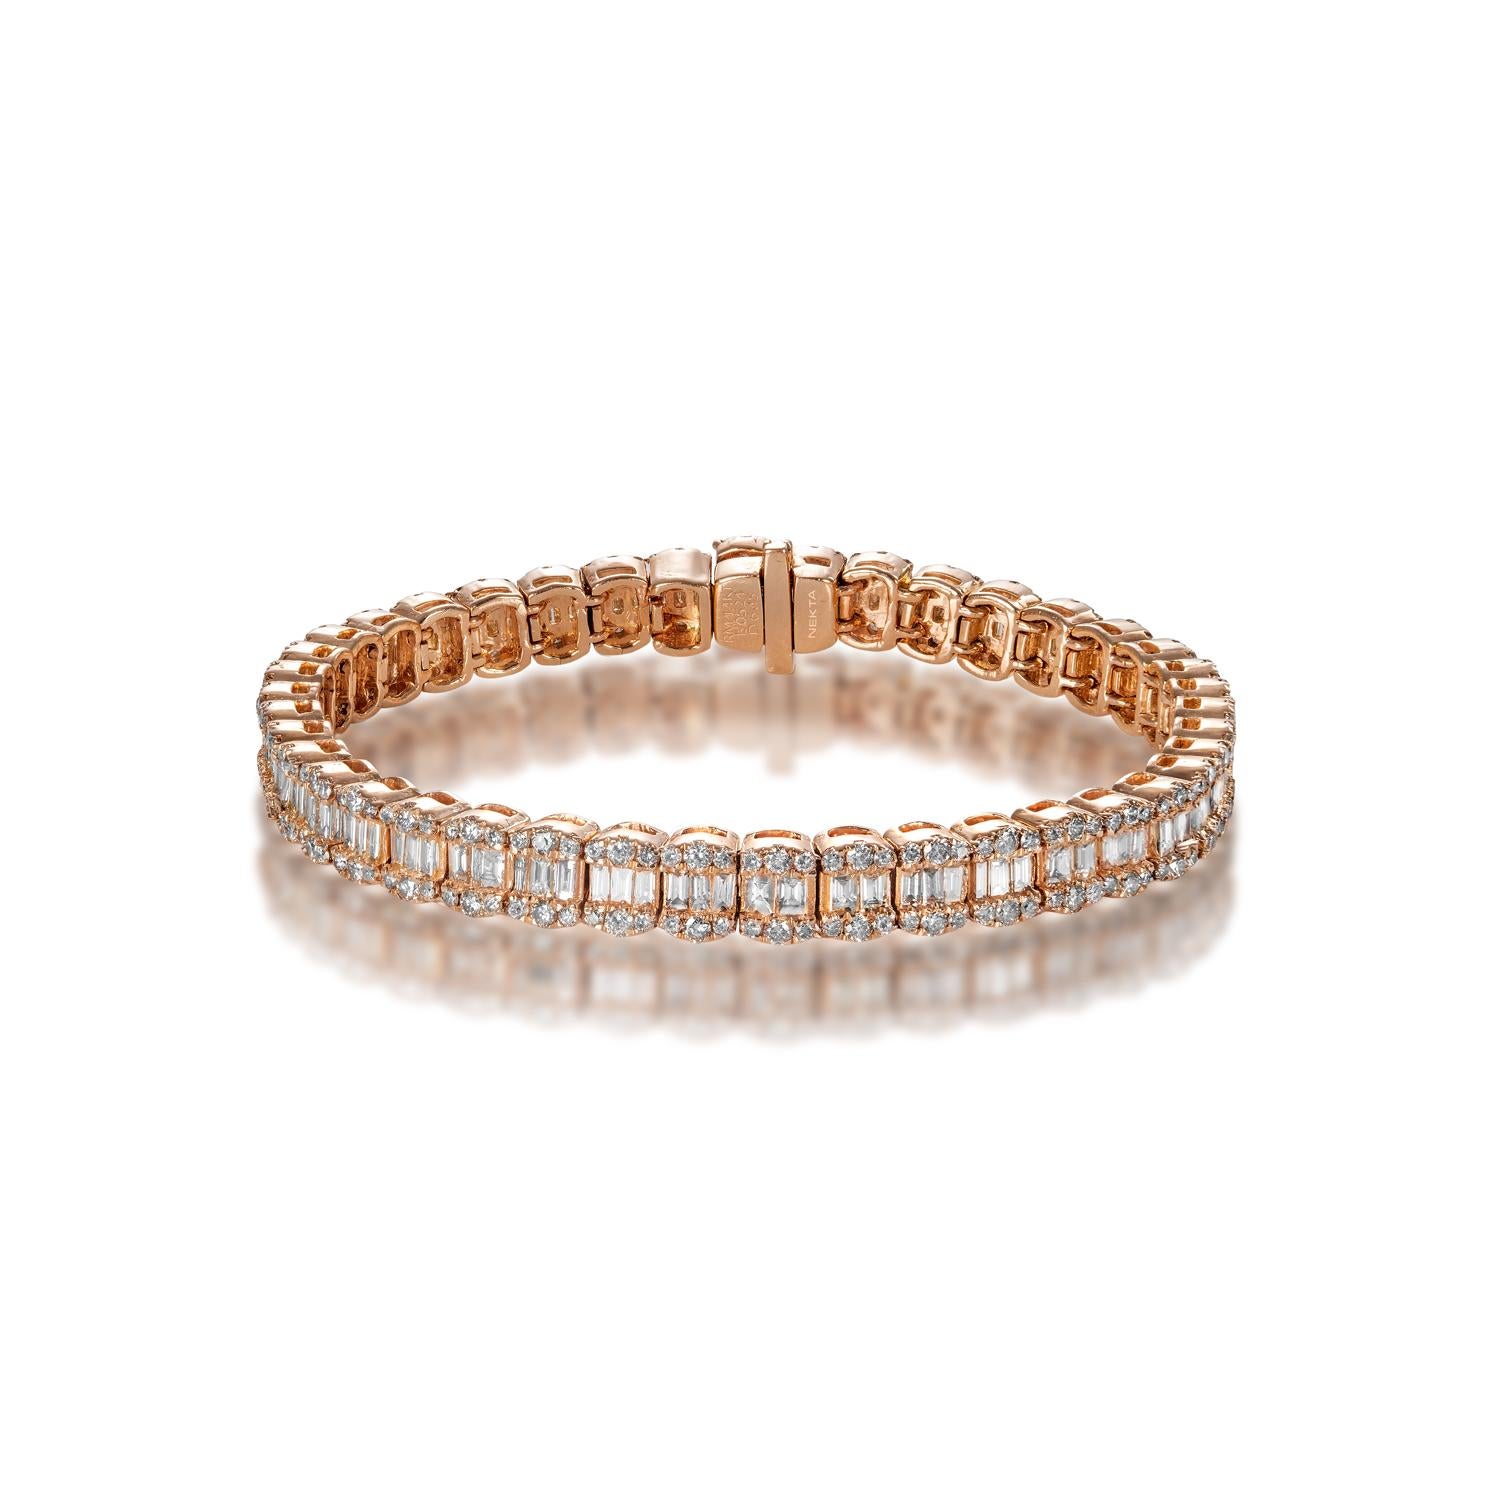 Style: Single Row Diamond Tennis Bracelet For Female
Diamonds
Diamond Size: 6.45 Carats
Diamond Shape: Combine Mix Shape

Setting: Miracle Set
Metal: 14 Karat Rose Gold 25.40 grams
Clasp: Box catch with hidden safety

Total Carat Weight:  6.45 Carats